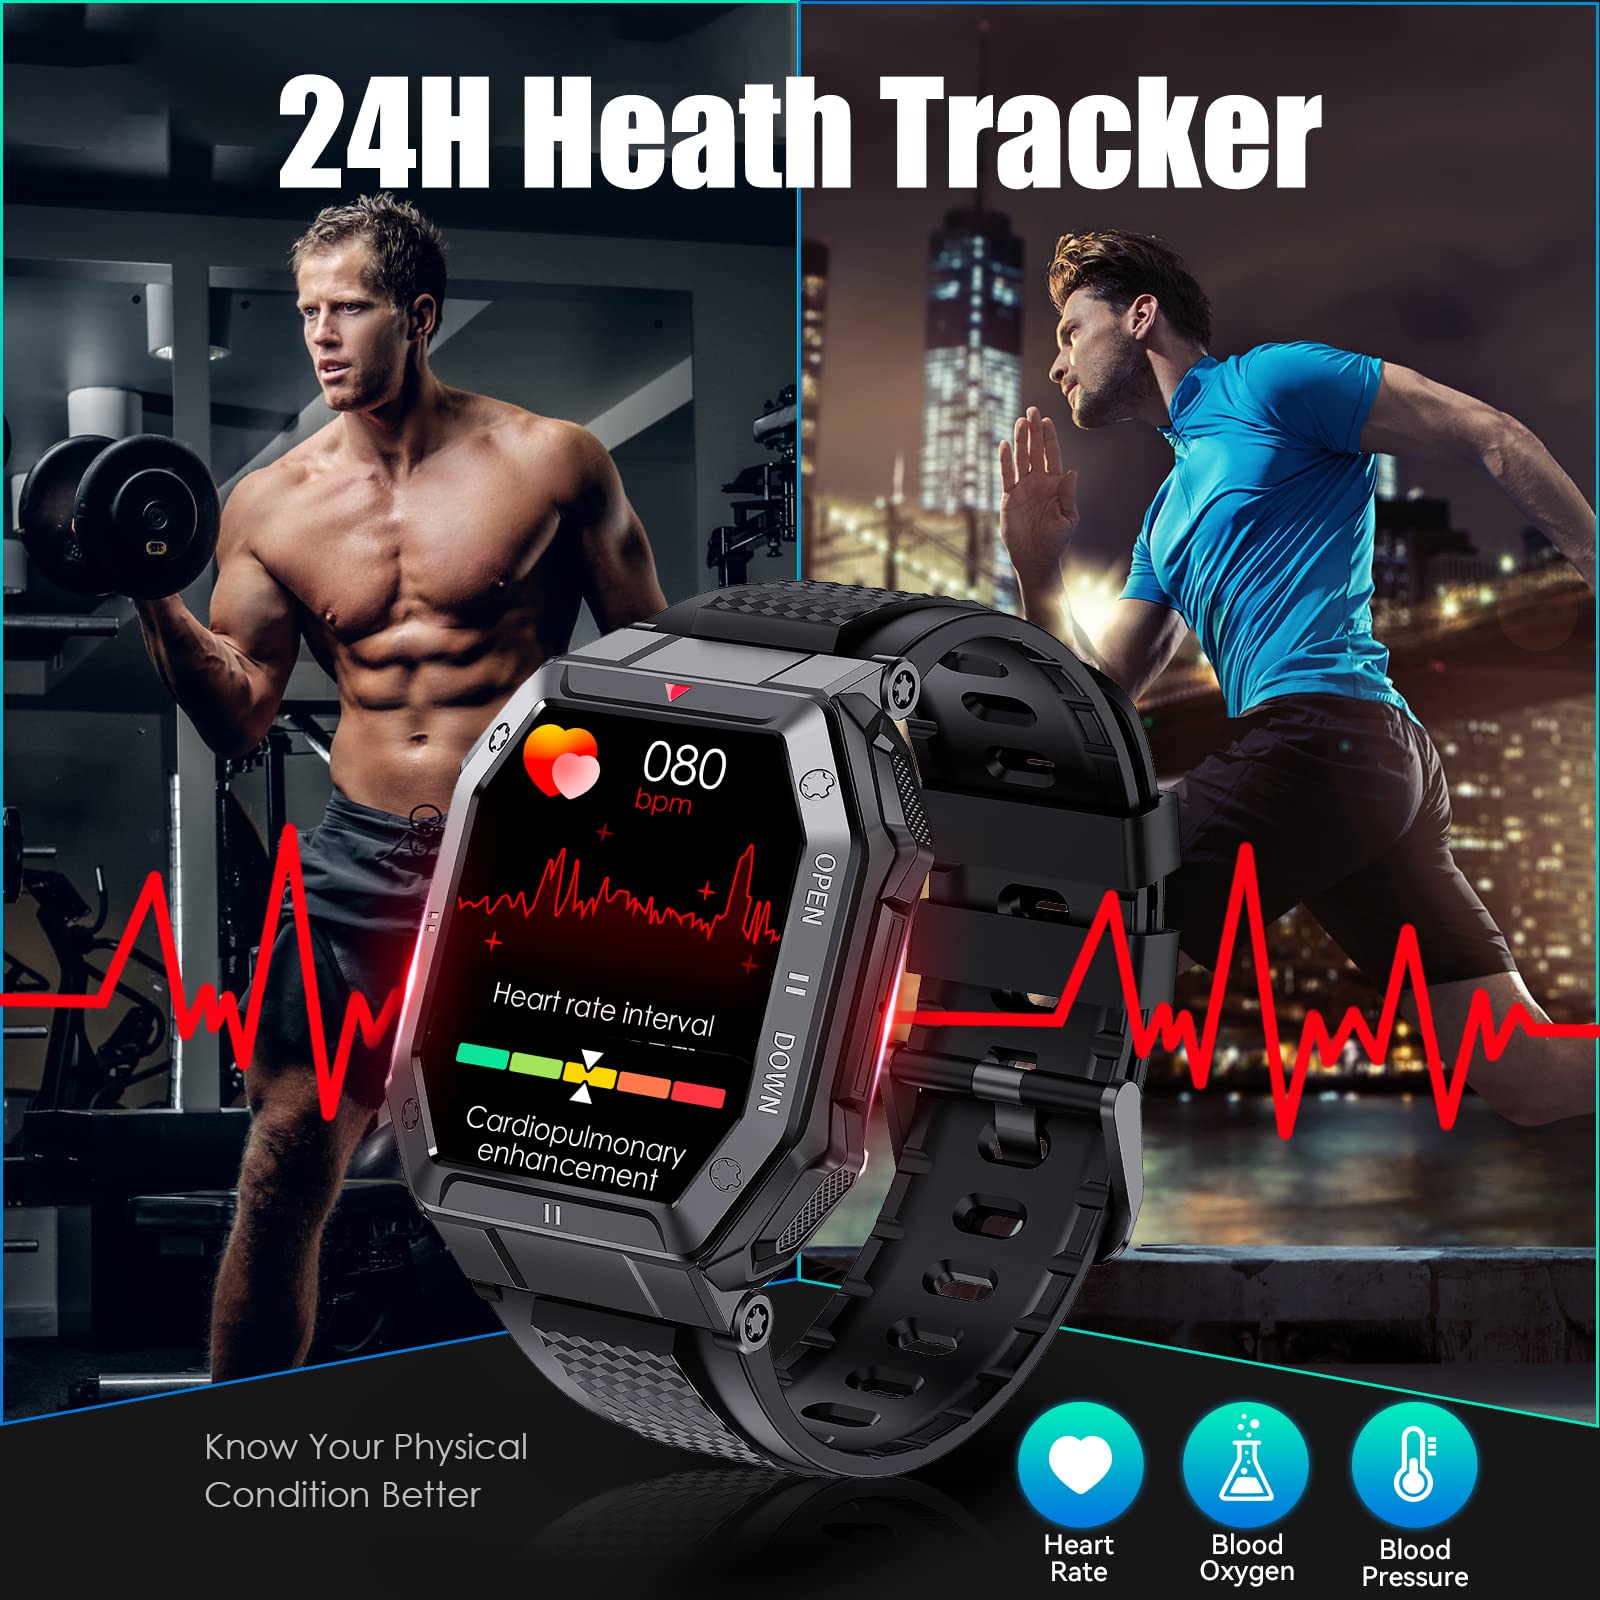 Military Smart Watch for Men with Call (Answer/Make) Outdoor Tactical Sports Watch Rugged 1.85